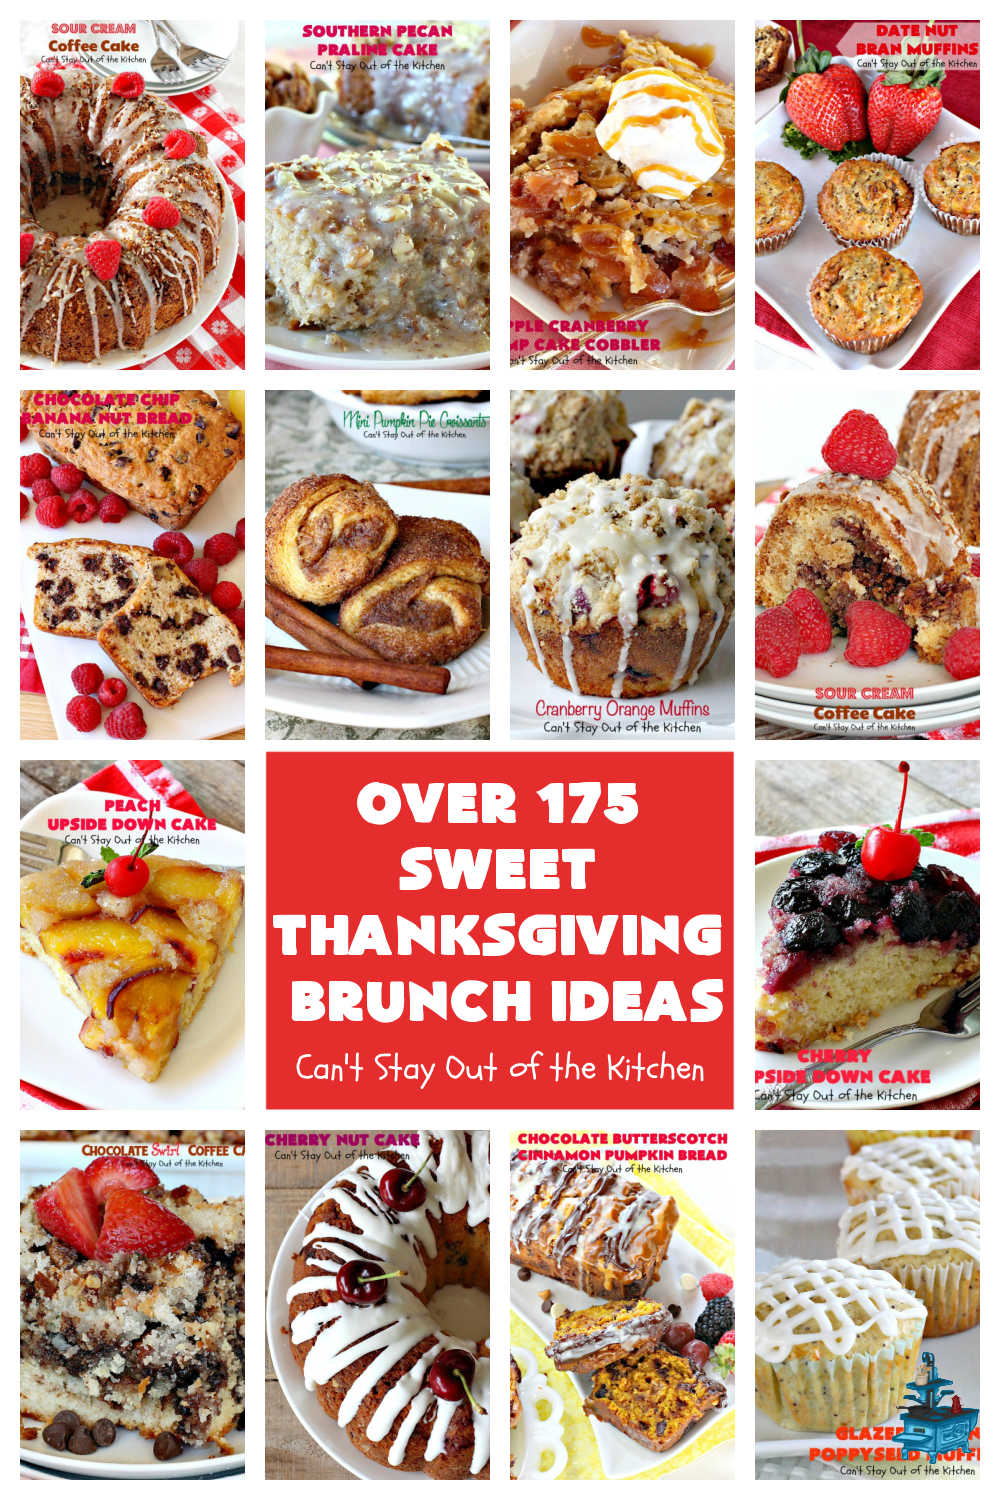 Sweet Thanksgiving Brunch Ideas | Can't Stay Out of the Kitchen | this collection includes over 175 #recipes for #donuts #SweetRolls & #CinnamonRolls, #BreakfastCobblers, #muffins, sweet #breads, #pancakes #coffeecakes, #FrenchToast & more! Many #GlutenFree recipes also! If you need something sweet for #Thanksgiving or #Christmas #brunch or #breakfast, this is a fantastic selection of the best recipes ever! #ThanksgivingBreakfast #HolidayBreakfast #ChristmasBreakfast #SweetThanksgivingBreakfastIdeasSweet Thanksgiving Brunch Ideas | Can't Stay Out of the Kitchen | this collection includes over 175 #recipes for #donuts #SweetRolls & #CinnamonRolls, #BreakfastCobblers, #muffins, sweet #breads, #pancakes #coffeecakes, #FrenchToast & more! Many #GlutenFree recipes also! If you need something sweet for #Thanksgiving or #Christmas #brunch or #breakfast, this is a fantastic selection of the best recipes ever! #ThanksgivingBreakfast #HolidayBreakfast #ChristmasBreakfast #SweetThanksgivingBreakfastIdeas